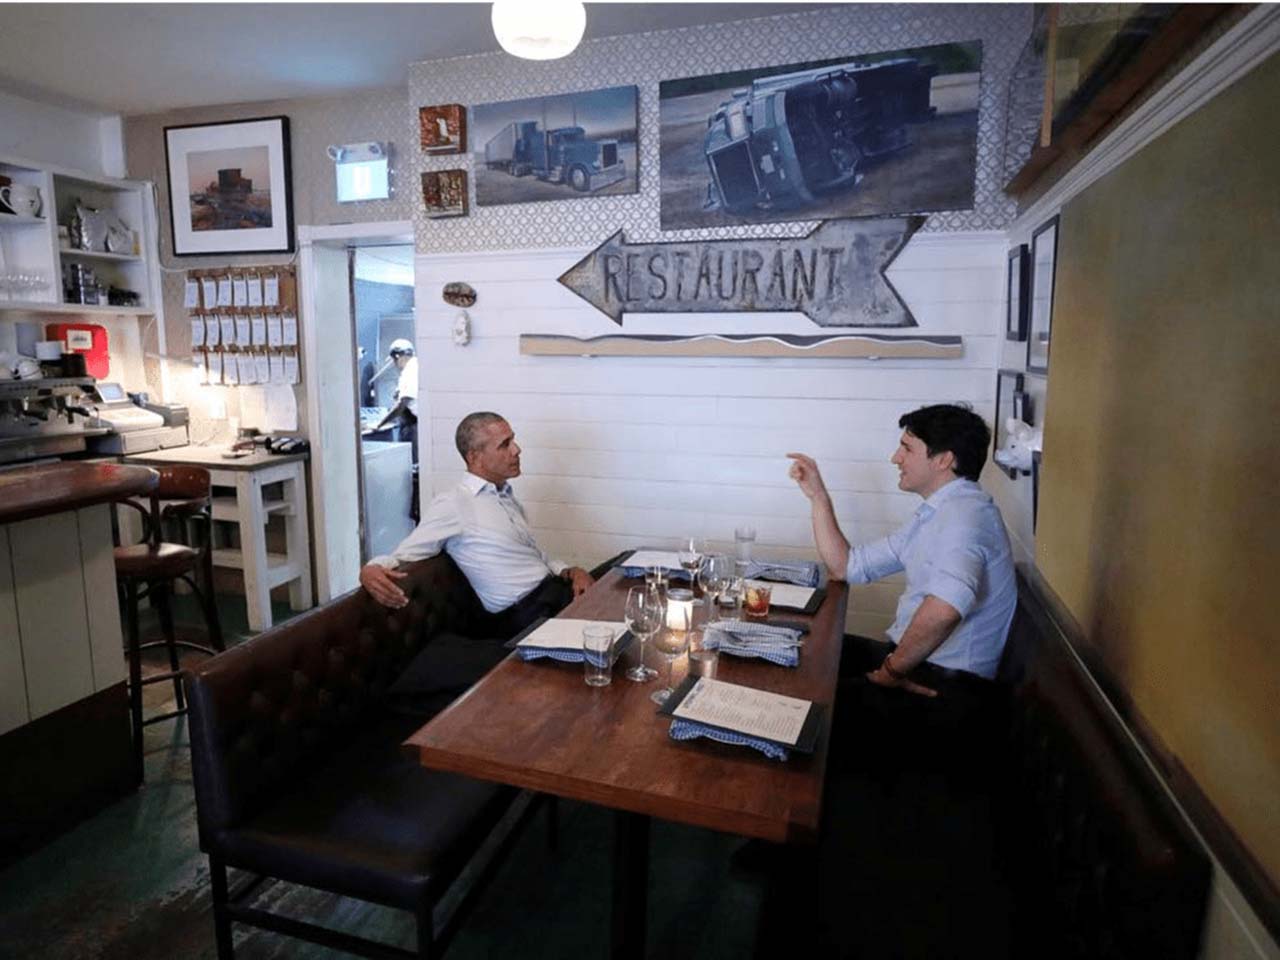 22 Photos From 2017 That Tell A Story: Former U.S. president Barrack Obama and Prime Ministed Of Canada, Justin Trudeau, are having a lobster at Liverpool House Montreal restaurant.